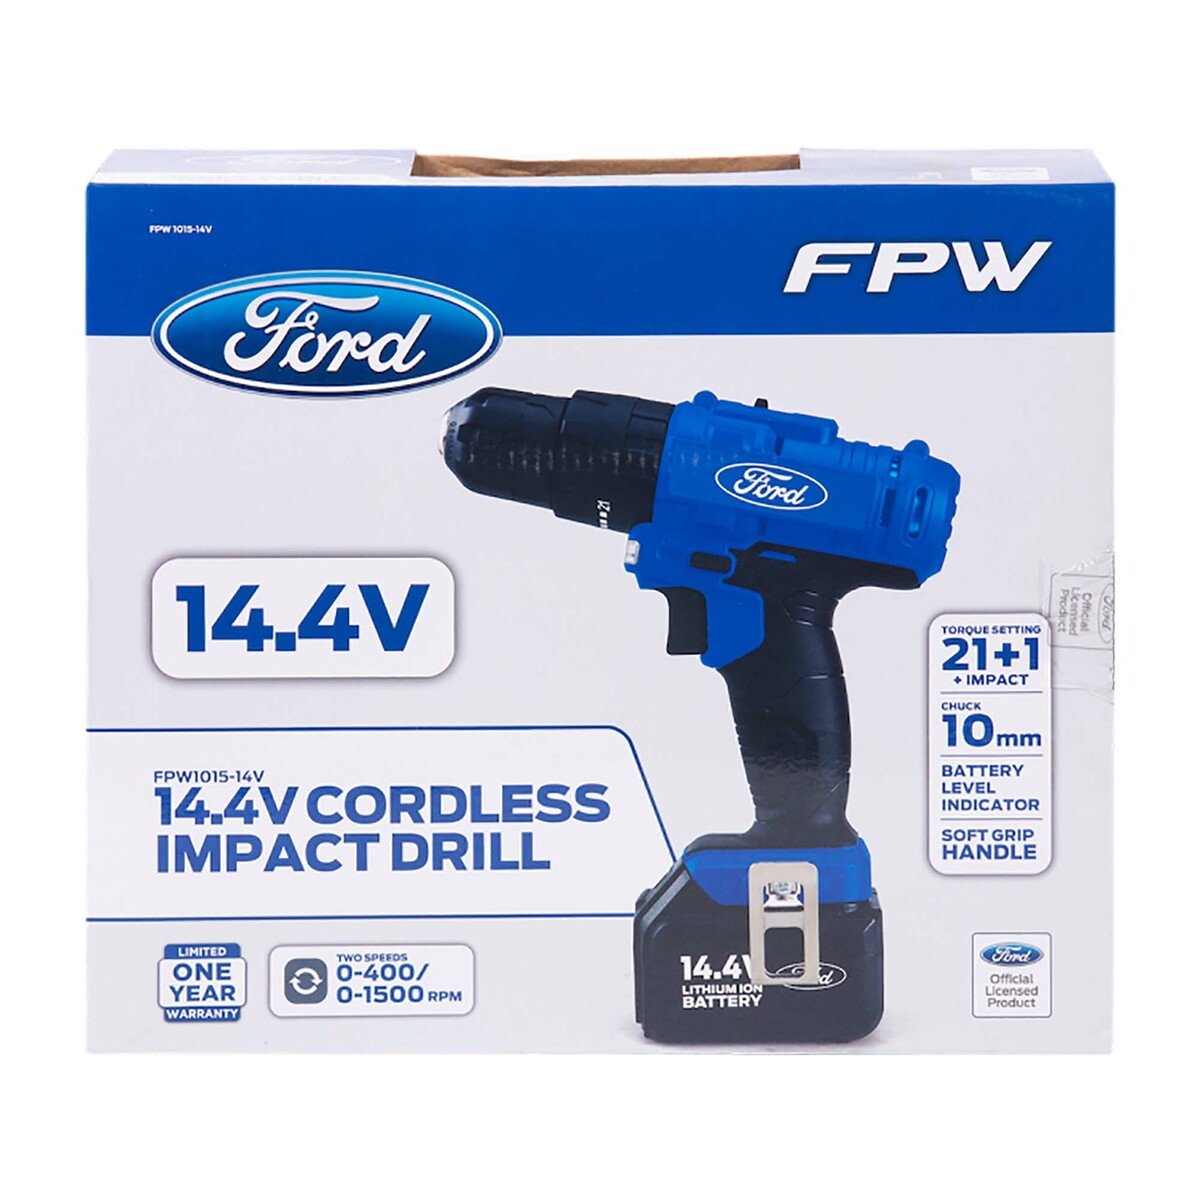 Ford Cordless Impact Drill 14.4V + Accessories 128pcs